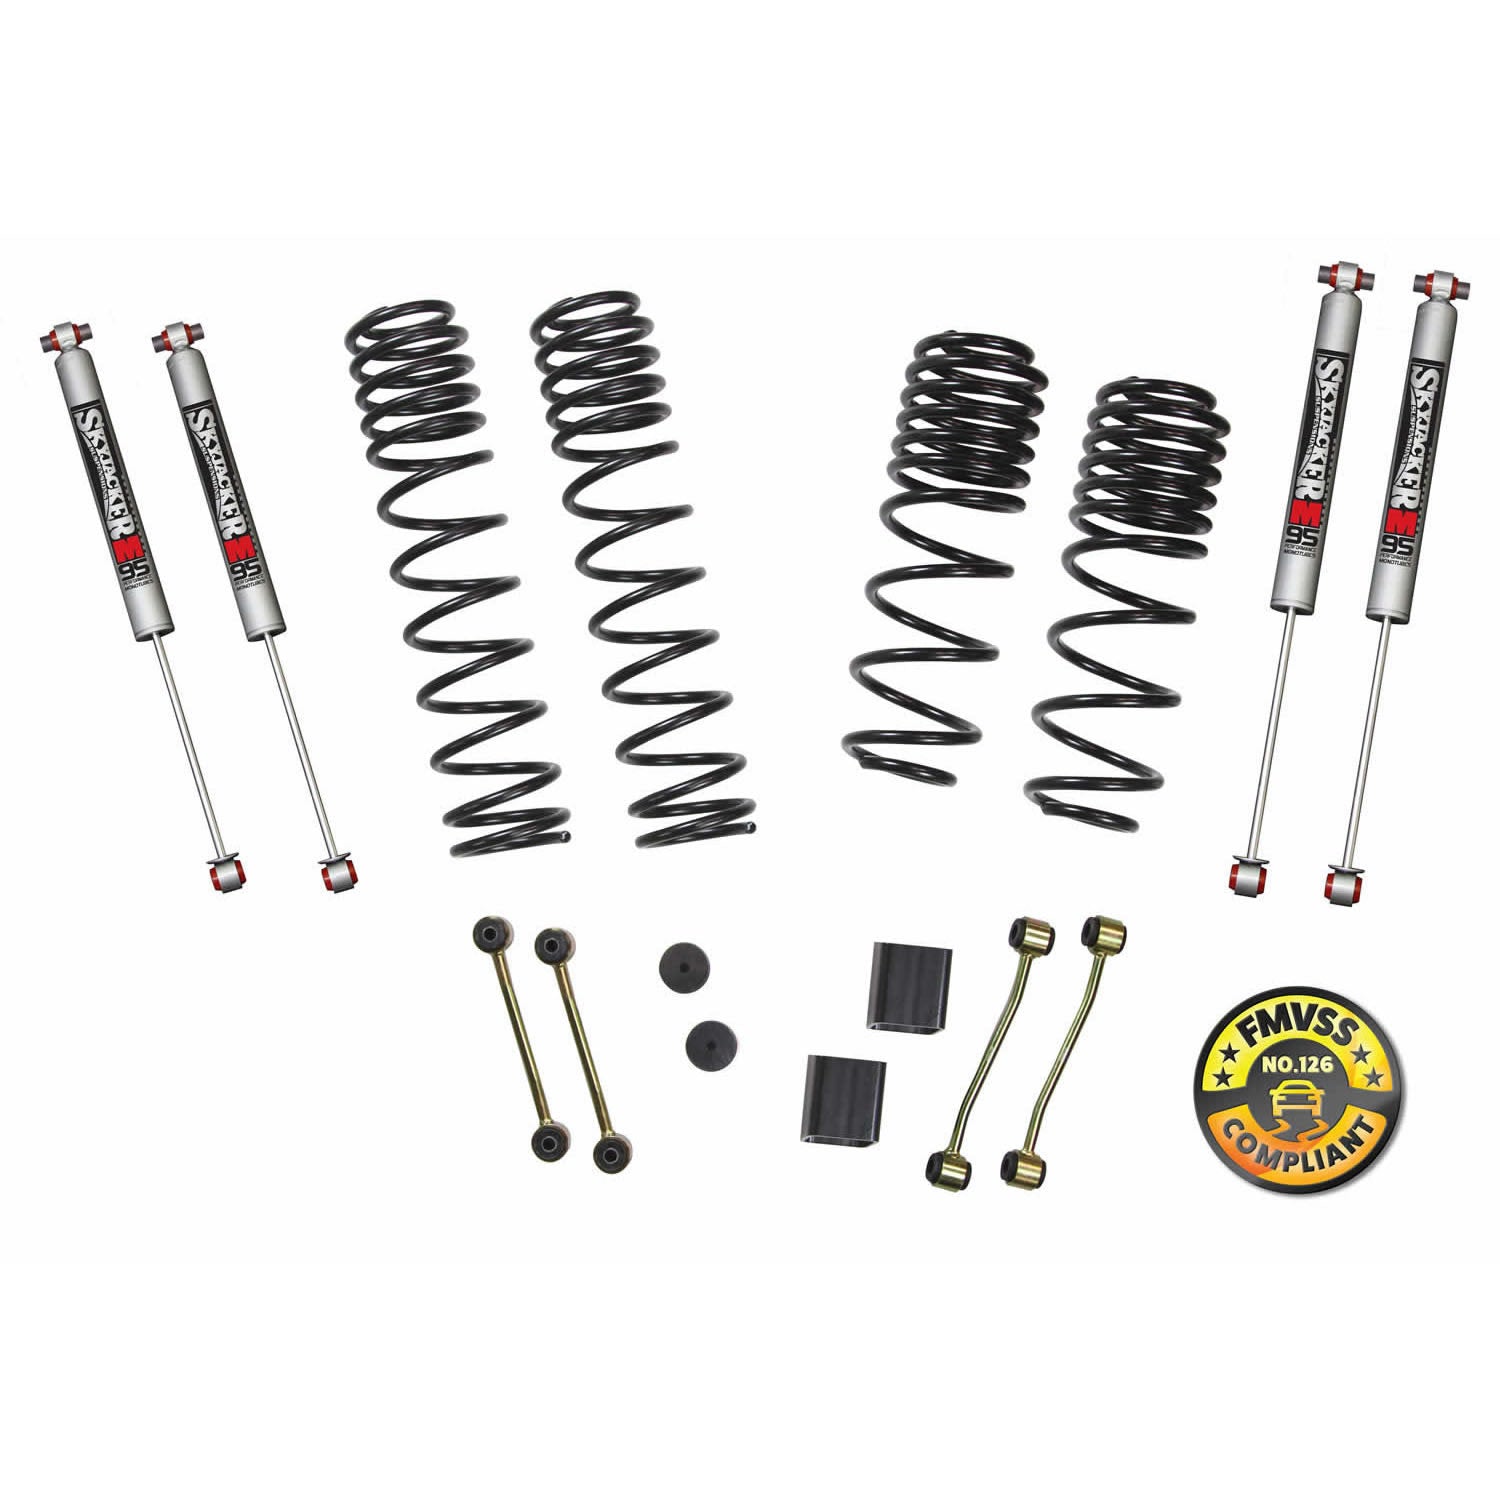 Suspension Lift Kit w/Shock 2-2.5 Inch Lift 18-19 Jeep Wrangler Unlimited Rubicon Incl. Frt./R. Dual Rate/Long Travel Series Coil Springs Extended Sway Bar End Links Grade 8 Mounting Hdwr M95 Monotube Shocks Skyjacker